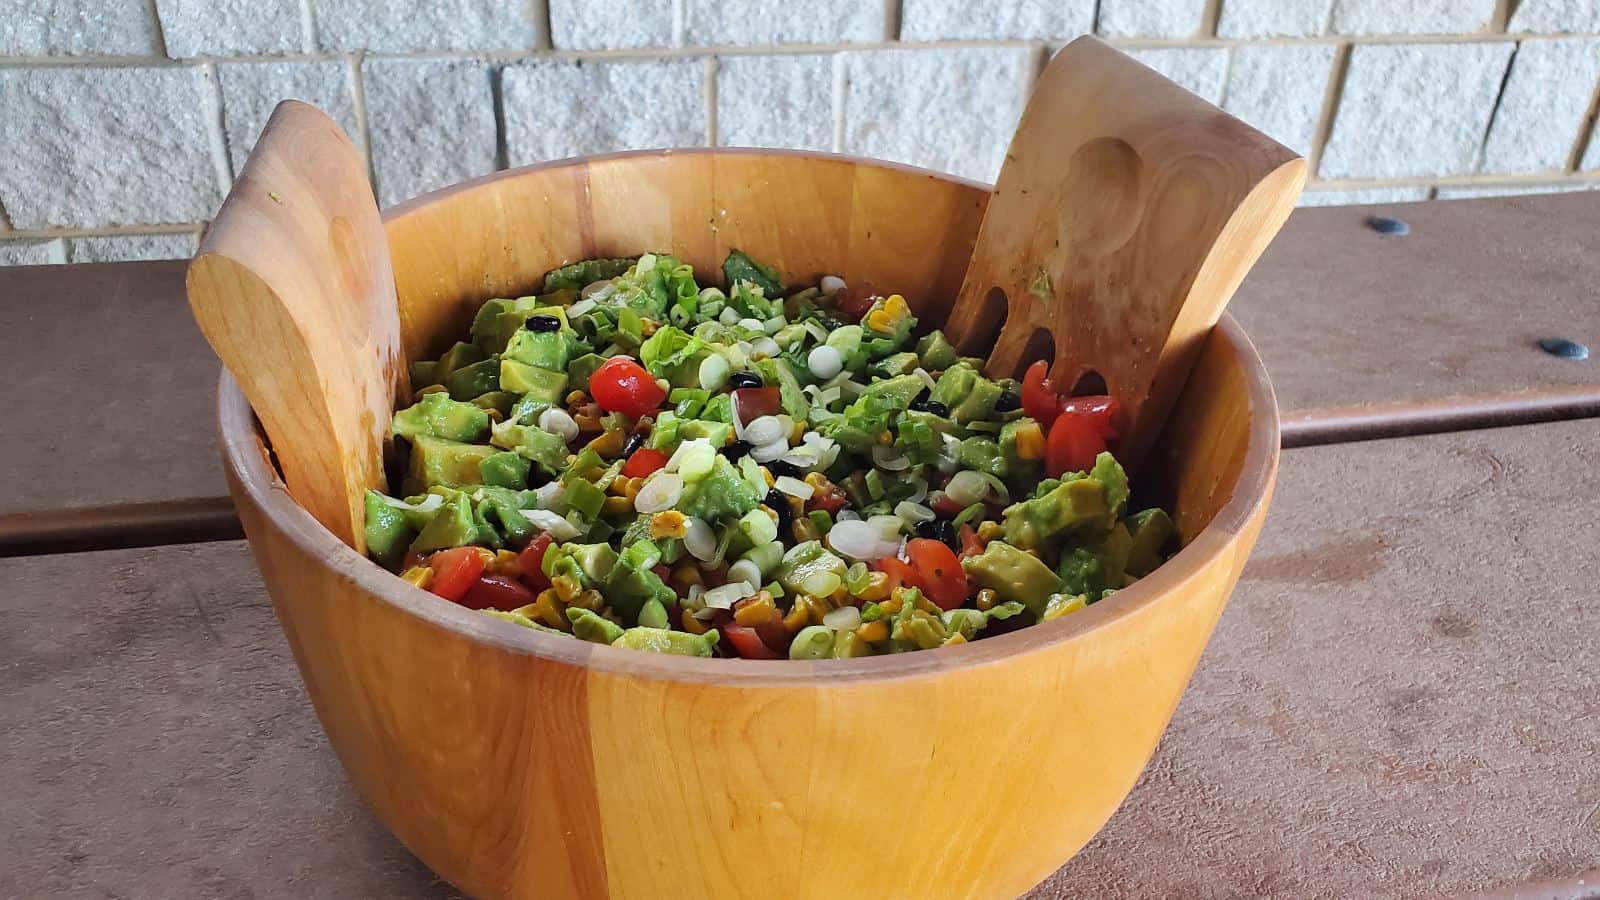 Image shows a wooden bowl containing avocado tomato salad shown from overhead and sitting on a picnnic table.